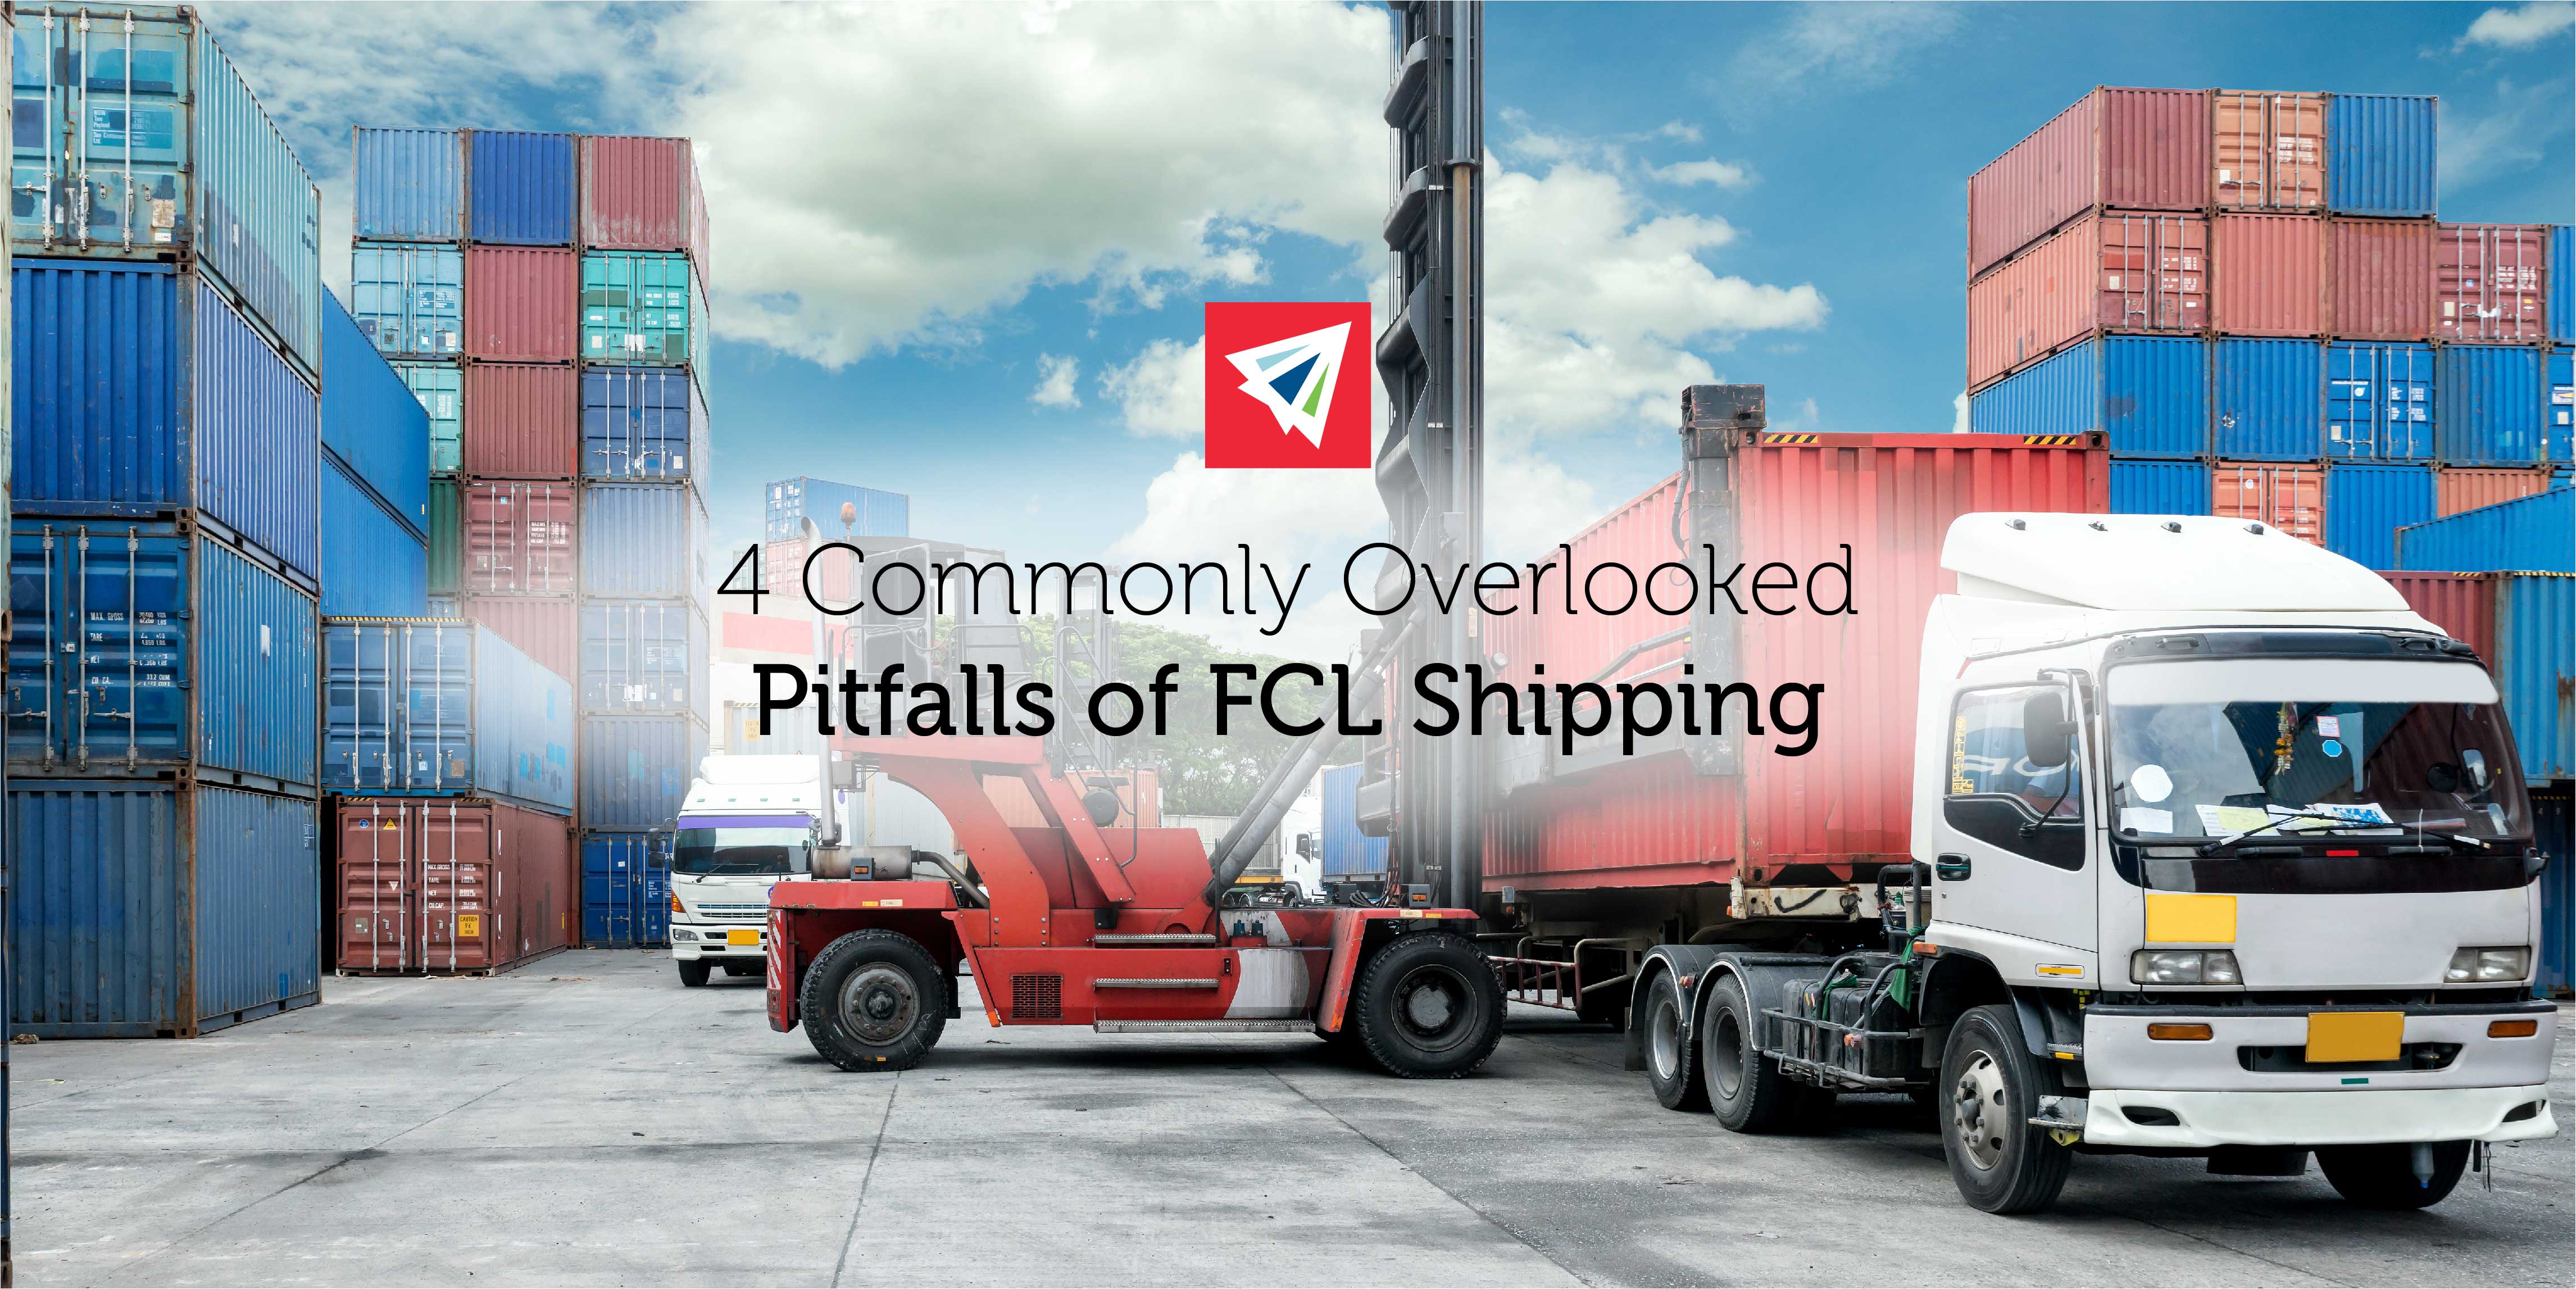 4 Commonly Overlooked Pitfalls of FCL Shipping